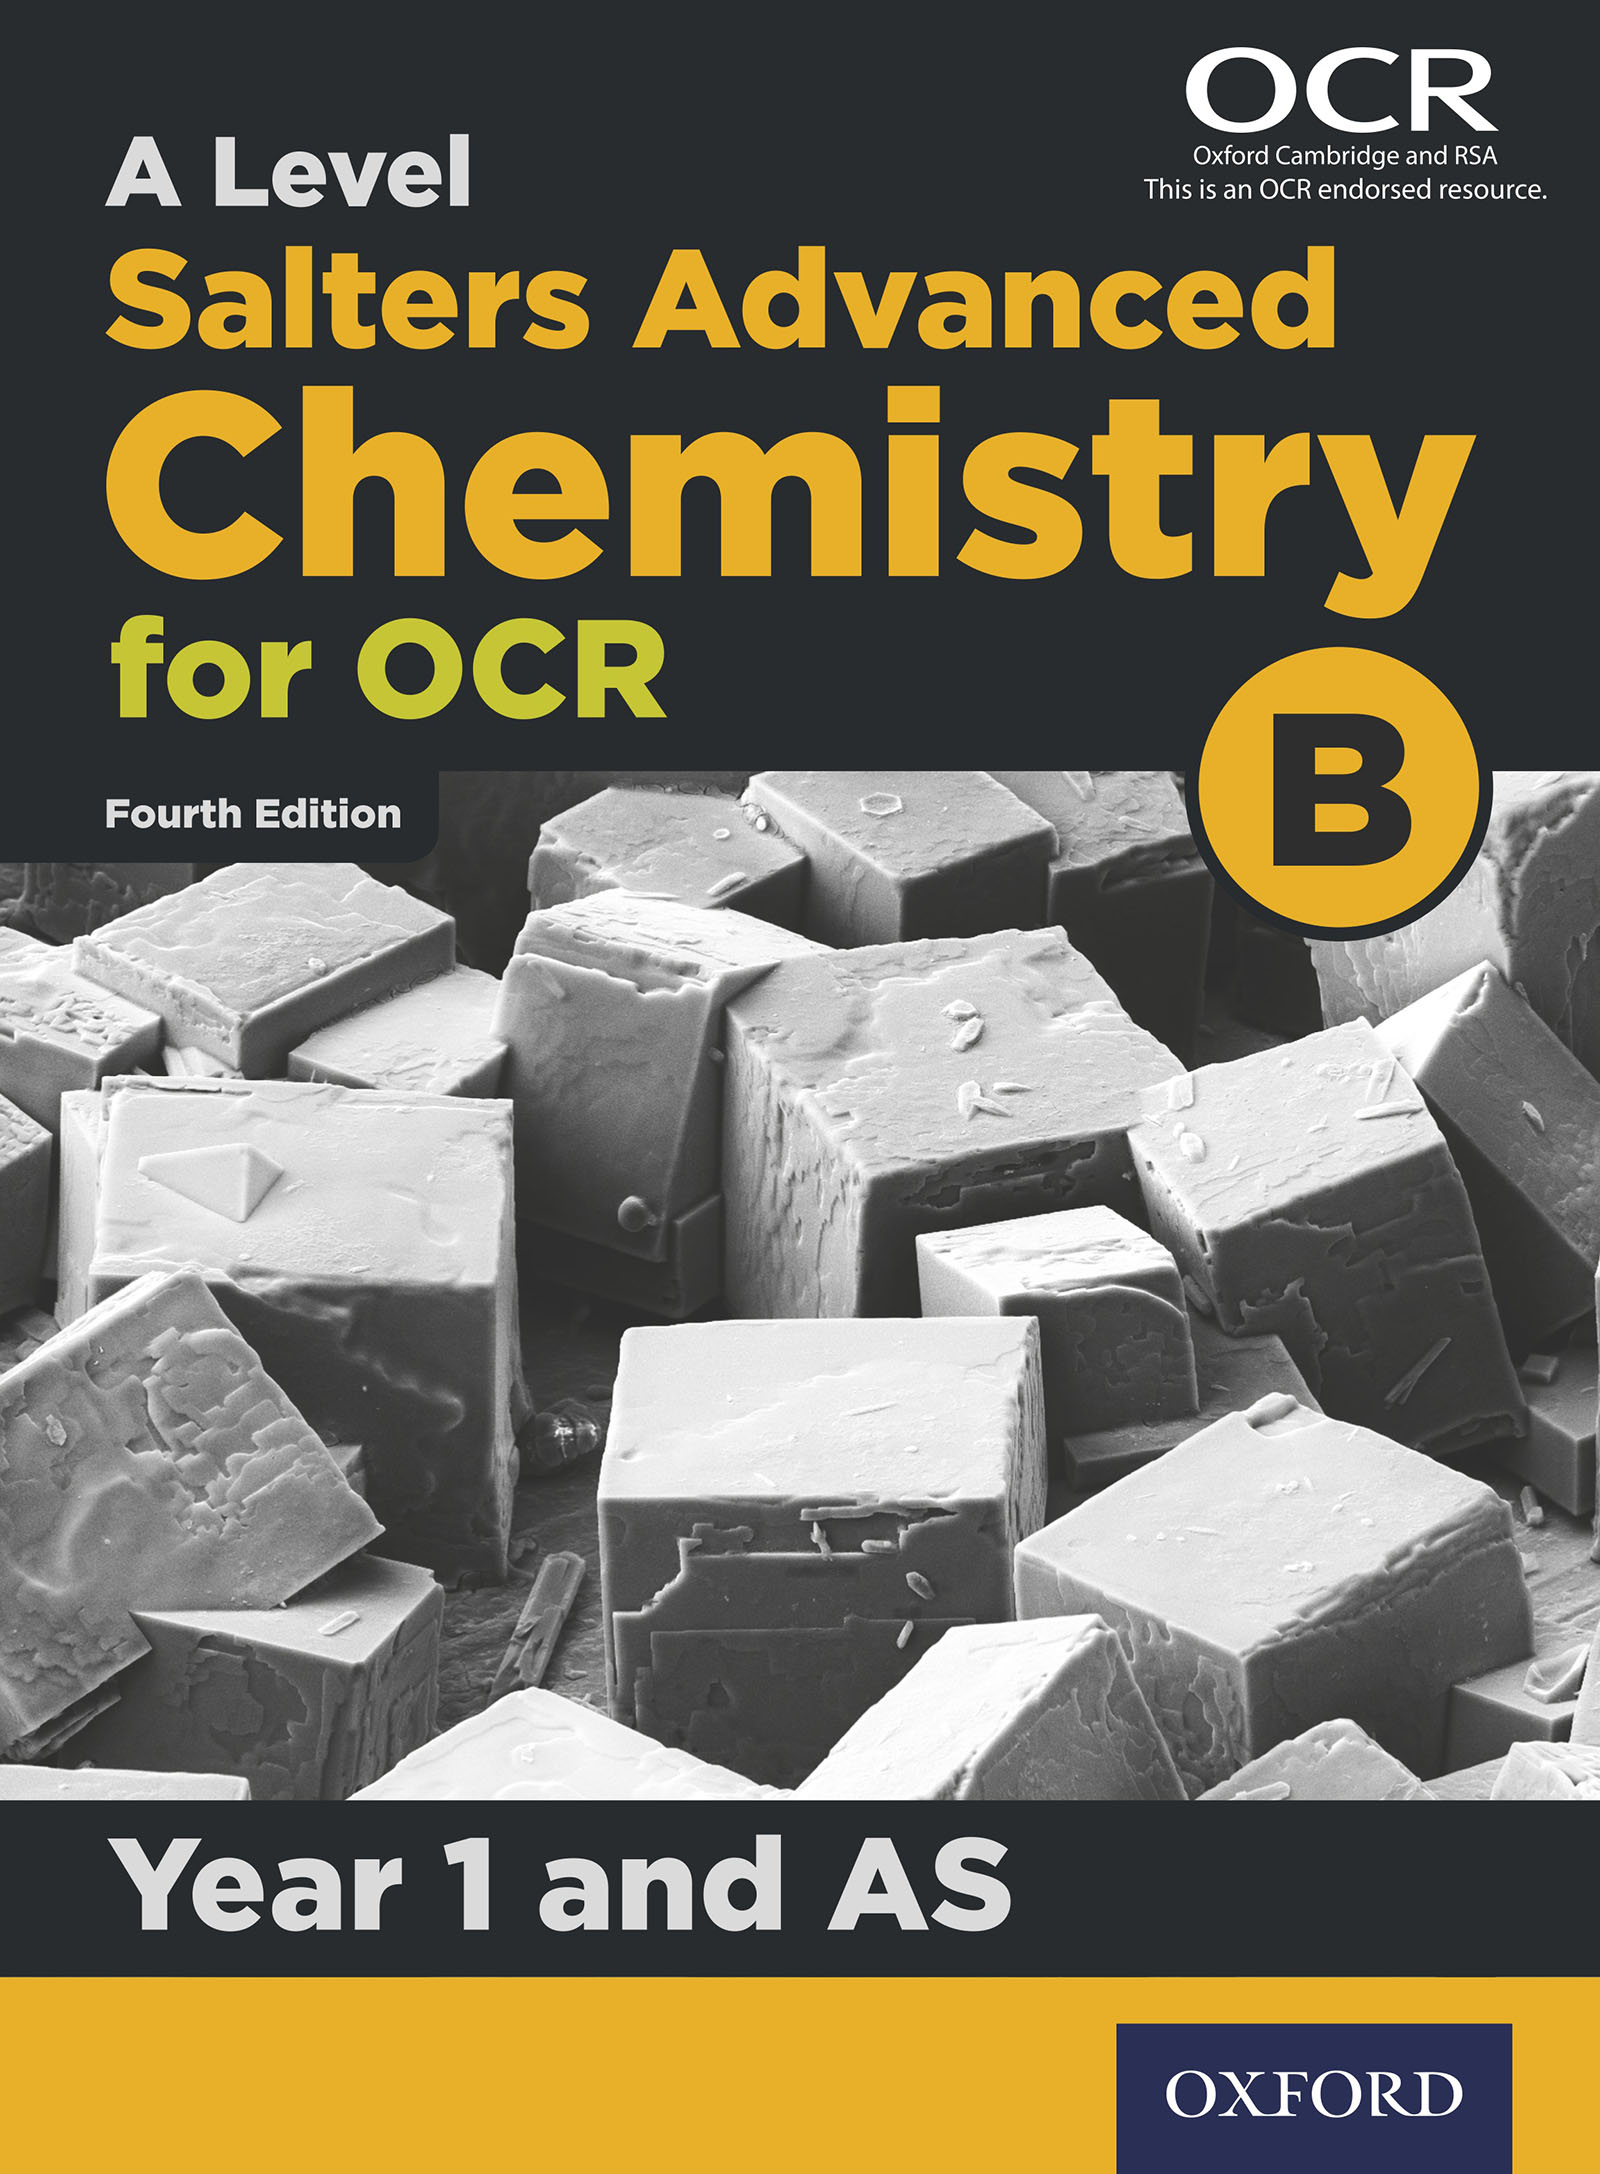 A Level Salters Advanced Chemistry for OCR B: Year 1 and AS